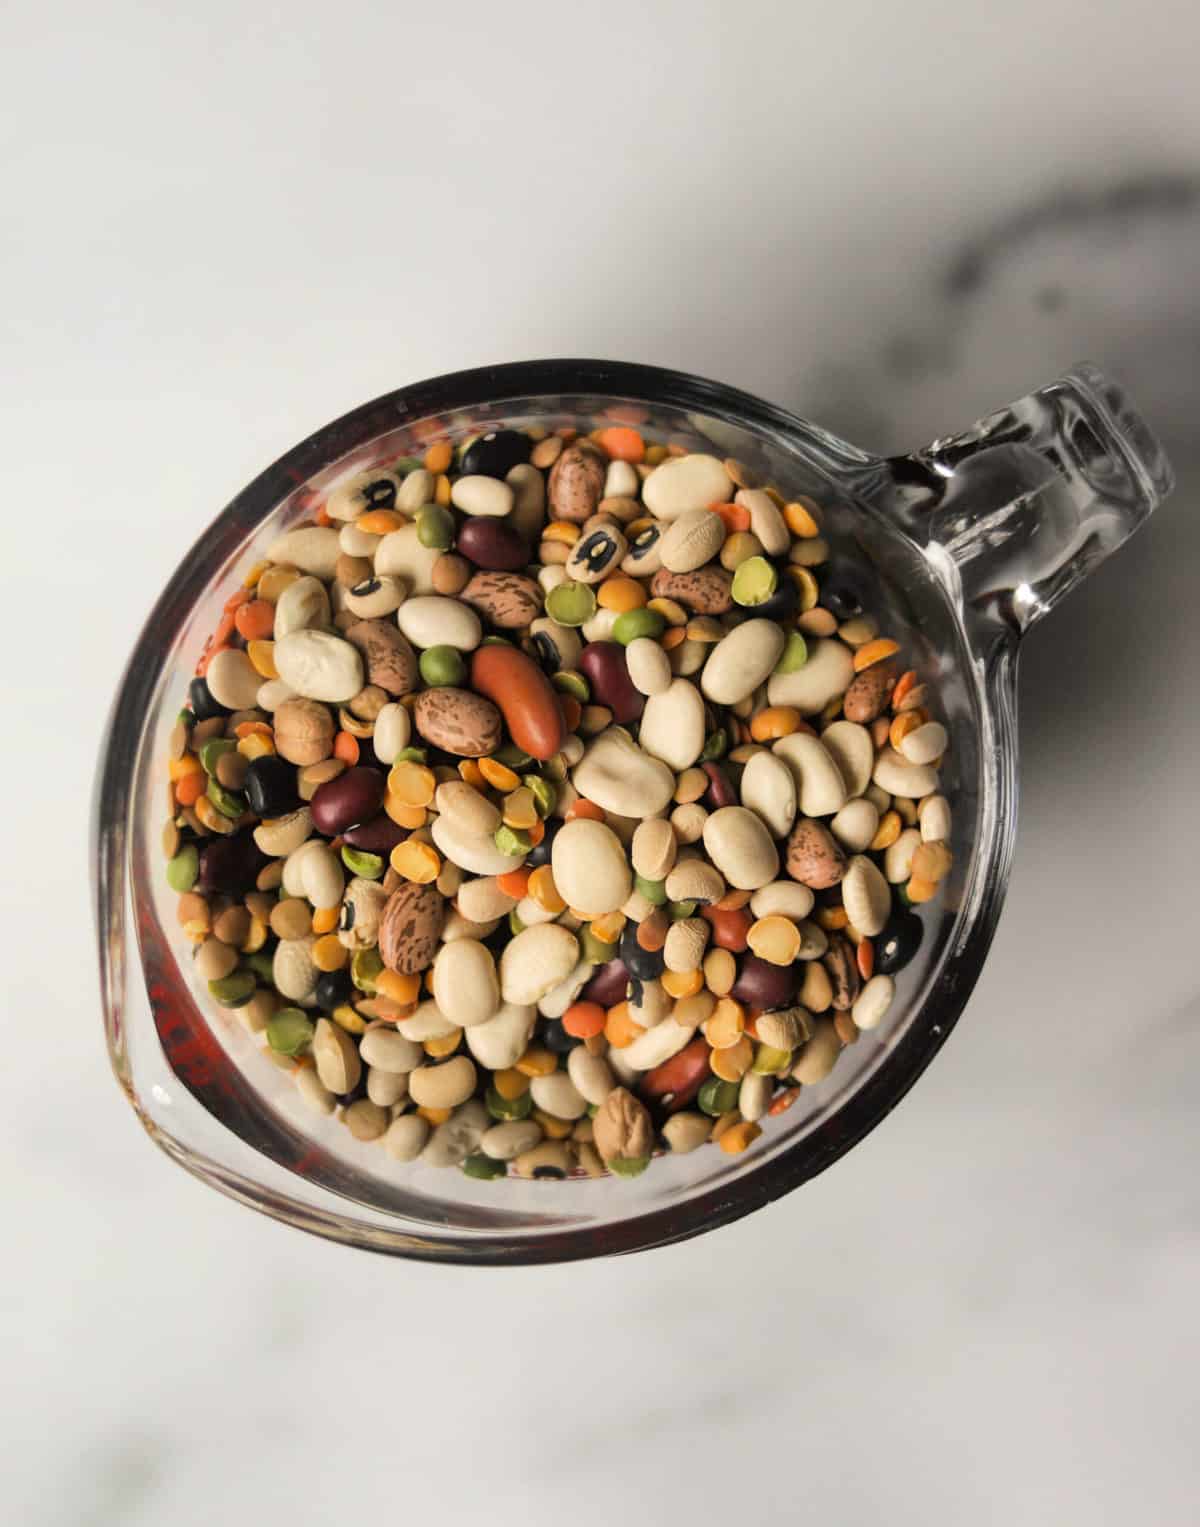 An overhead shot of a glass cup filled with dried beans.